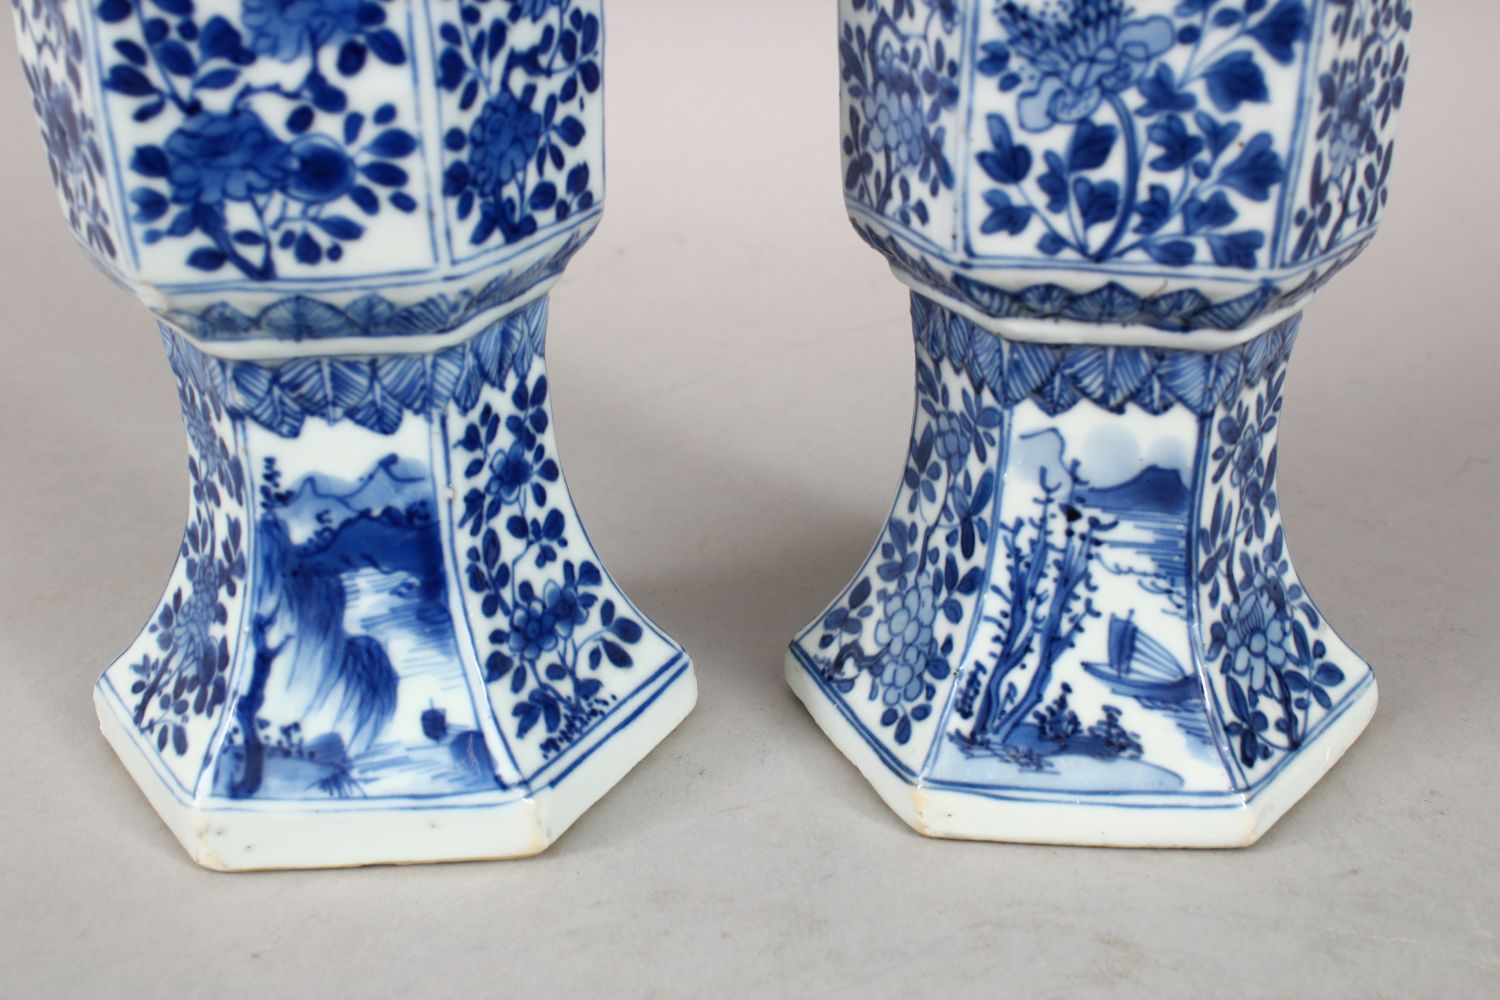 A GOOD PAIR OF 18TH CENTURY CHINESE KANGXI BLUE & WHITE GU SHAPE PORCELAIN VASES, with a multitude - Image 9 of 10